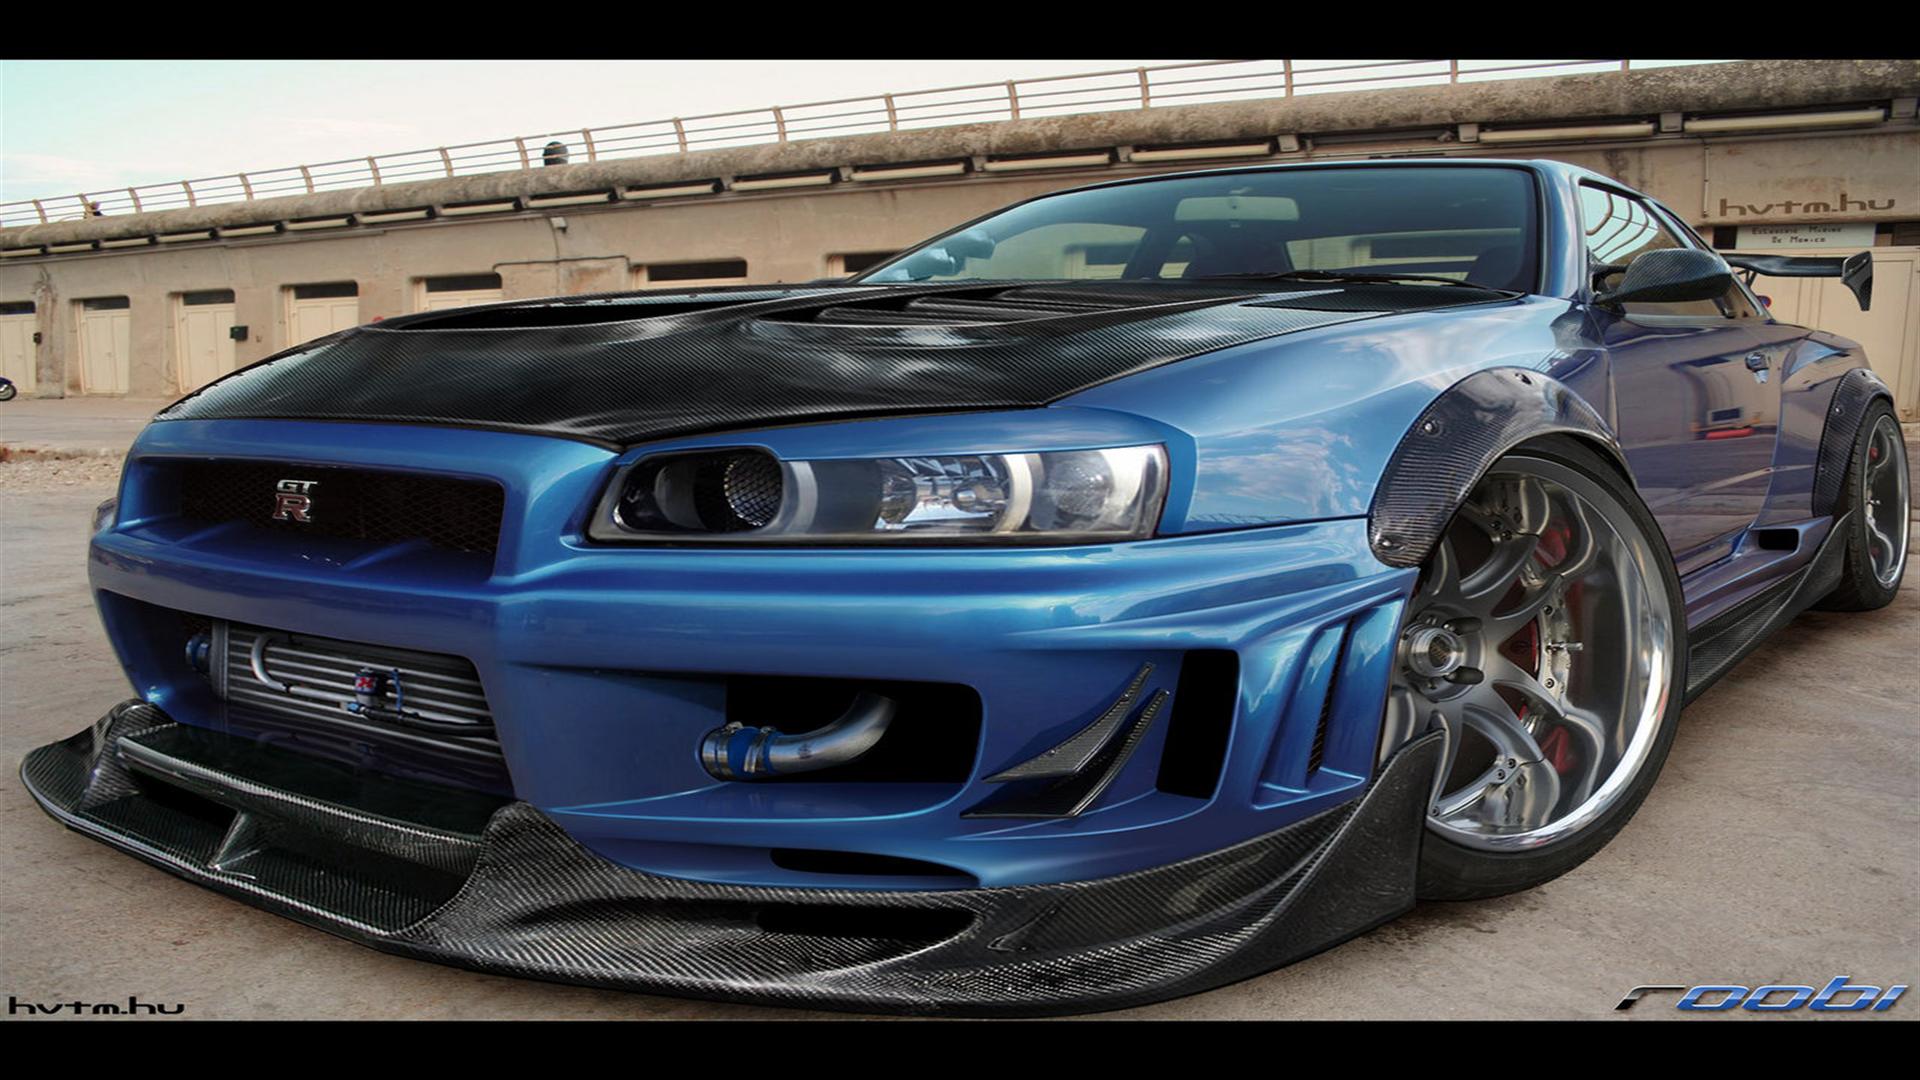 Free Download Exotic Wallpaper Of Nissan Skyline R34 1080p Hd High Resolution 19x1080 For Your Desktop Mobile Tablet Explore 41 R34 Skyline Wallpaper Hd Hd Gtr Wallpaper Nissan Skyline